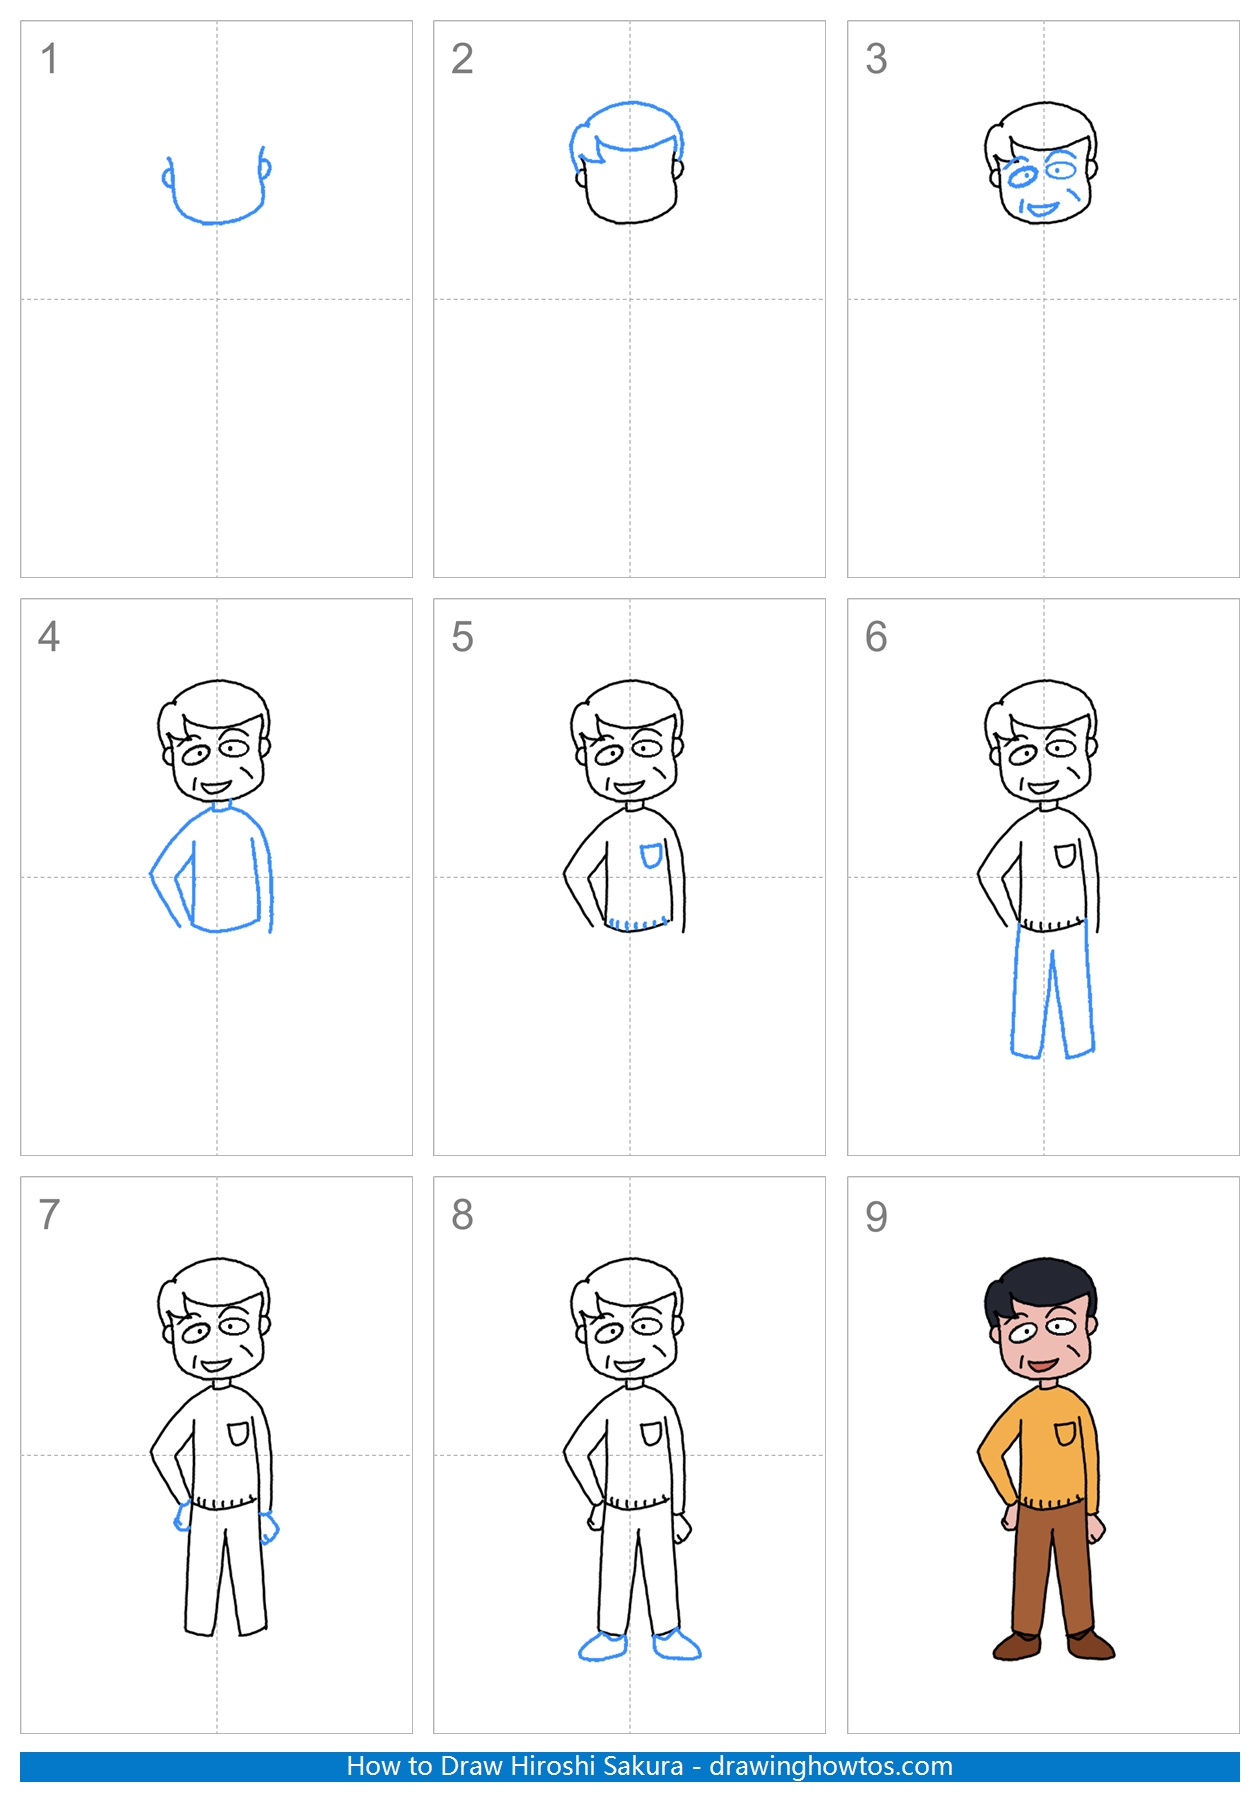 How to Draw Father Sakura Hiroshi from Maruko Step by Step